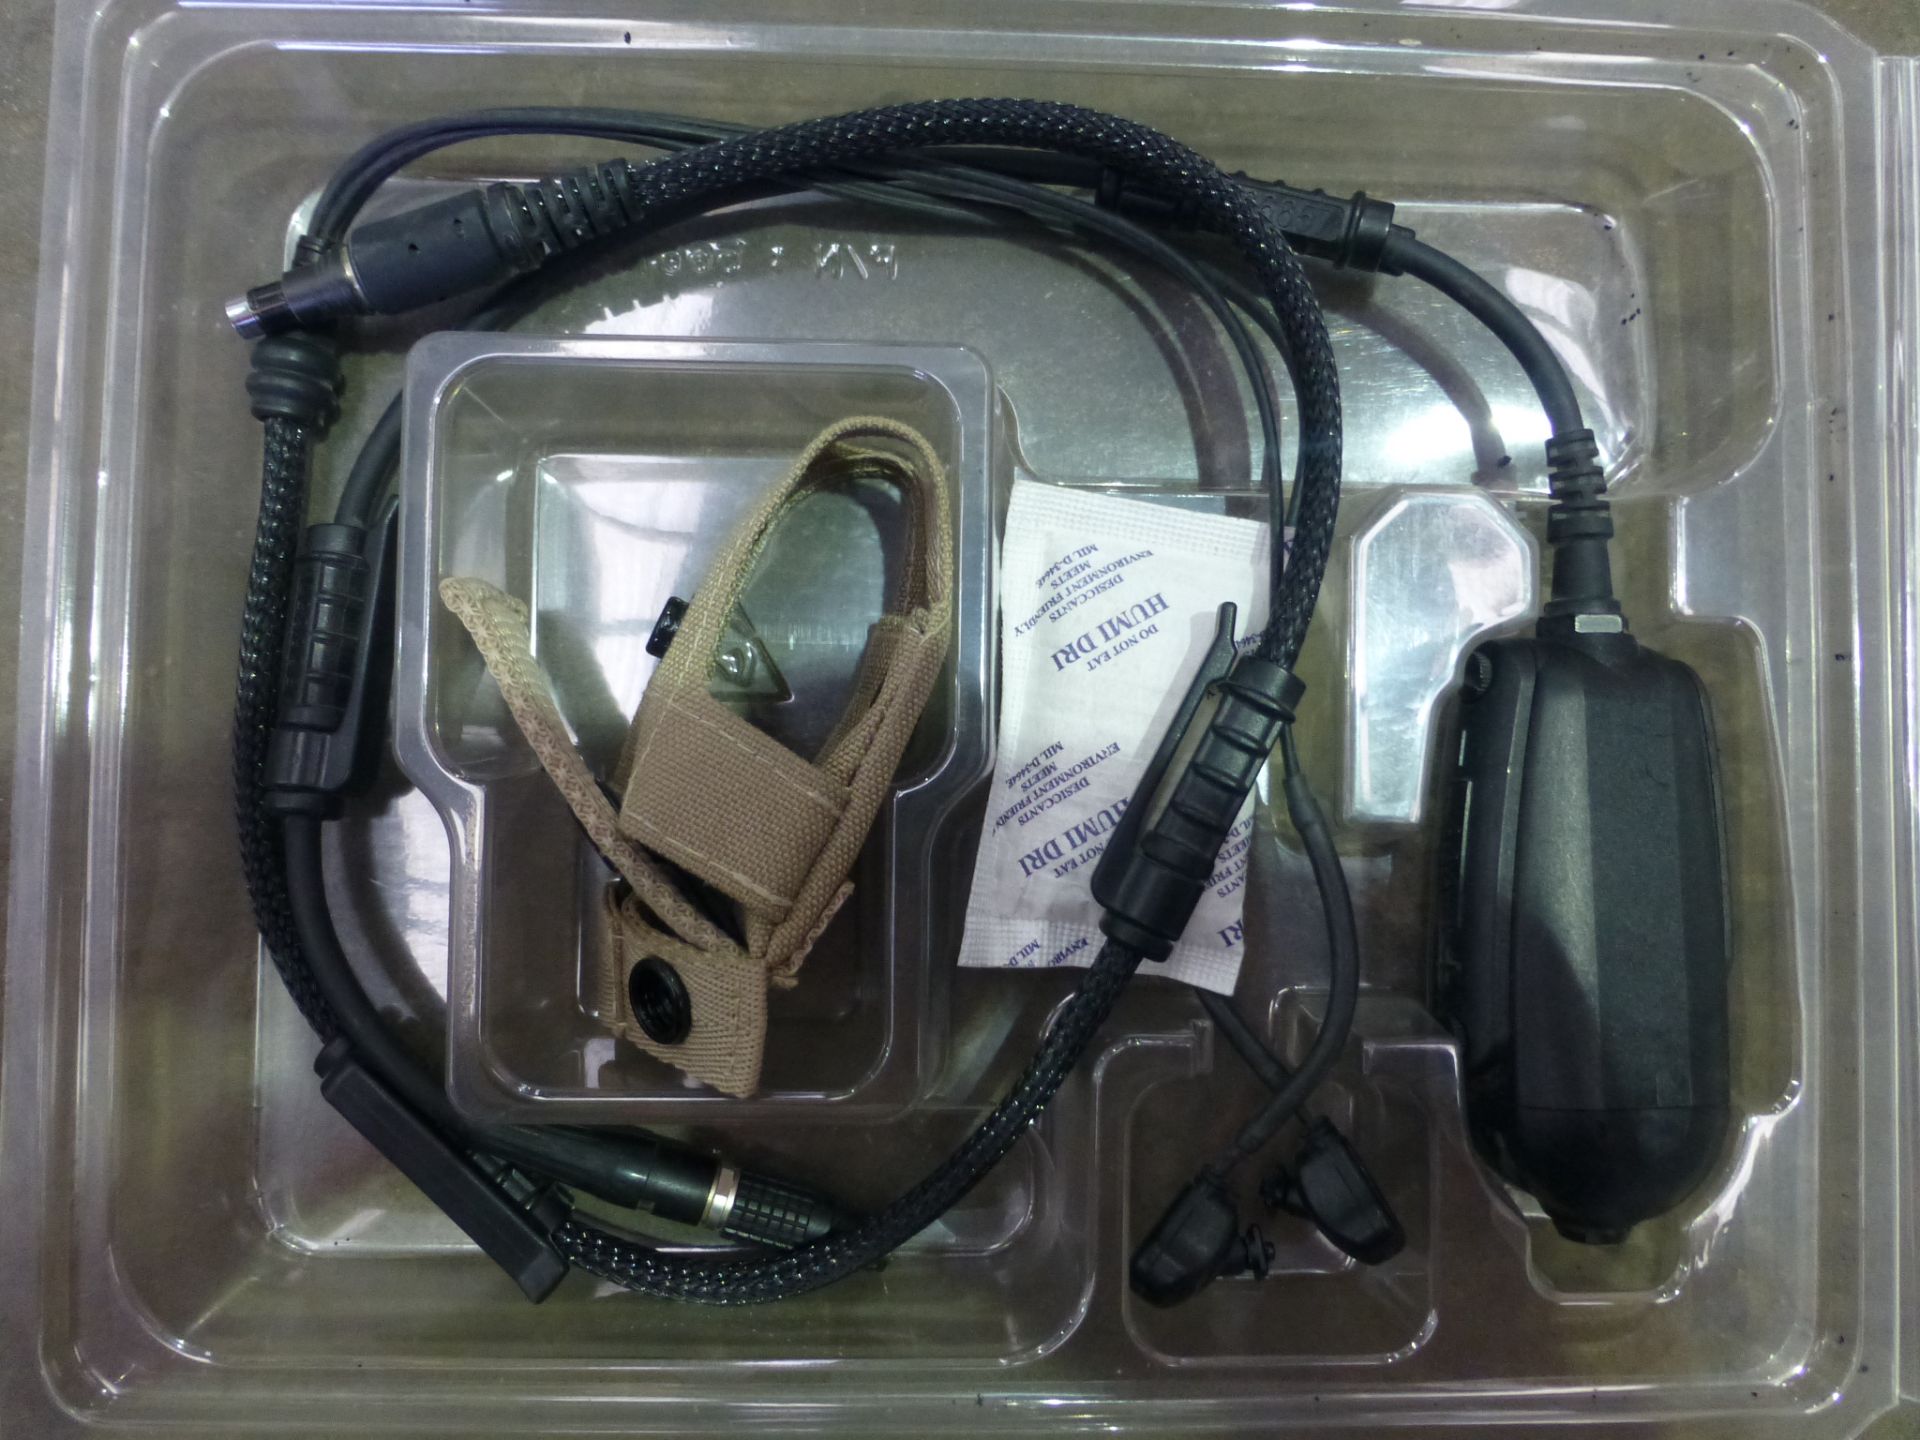 10 x Clansman Racal Frontier Headsets